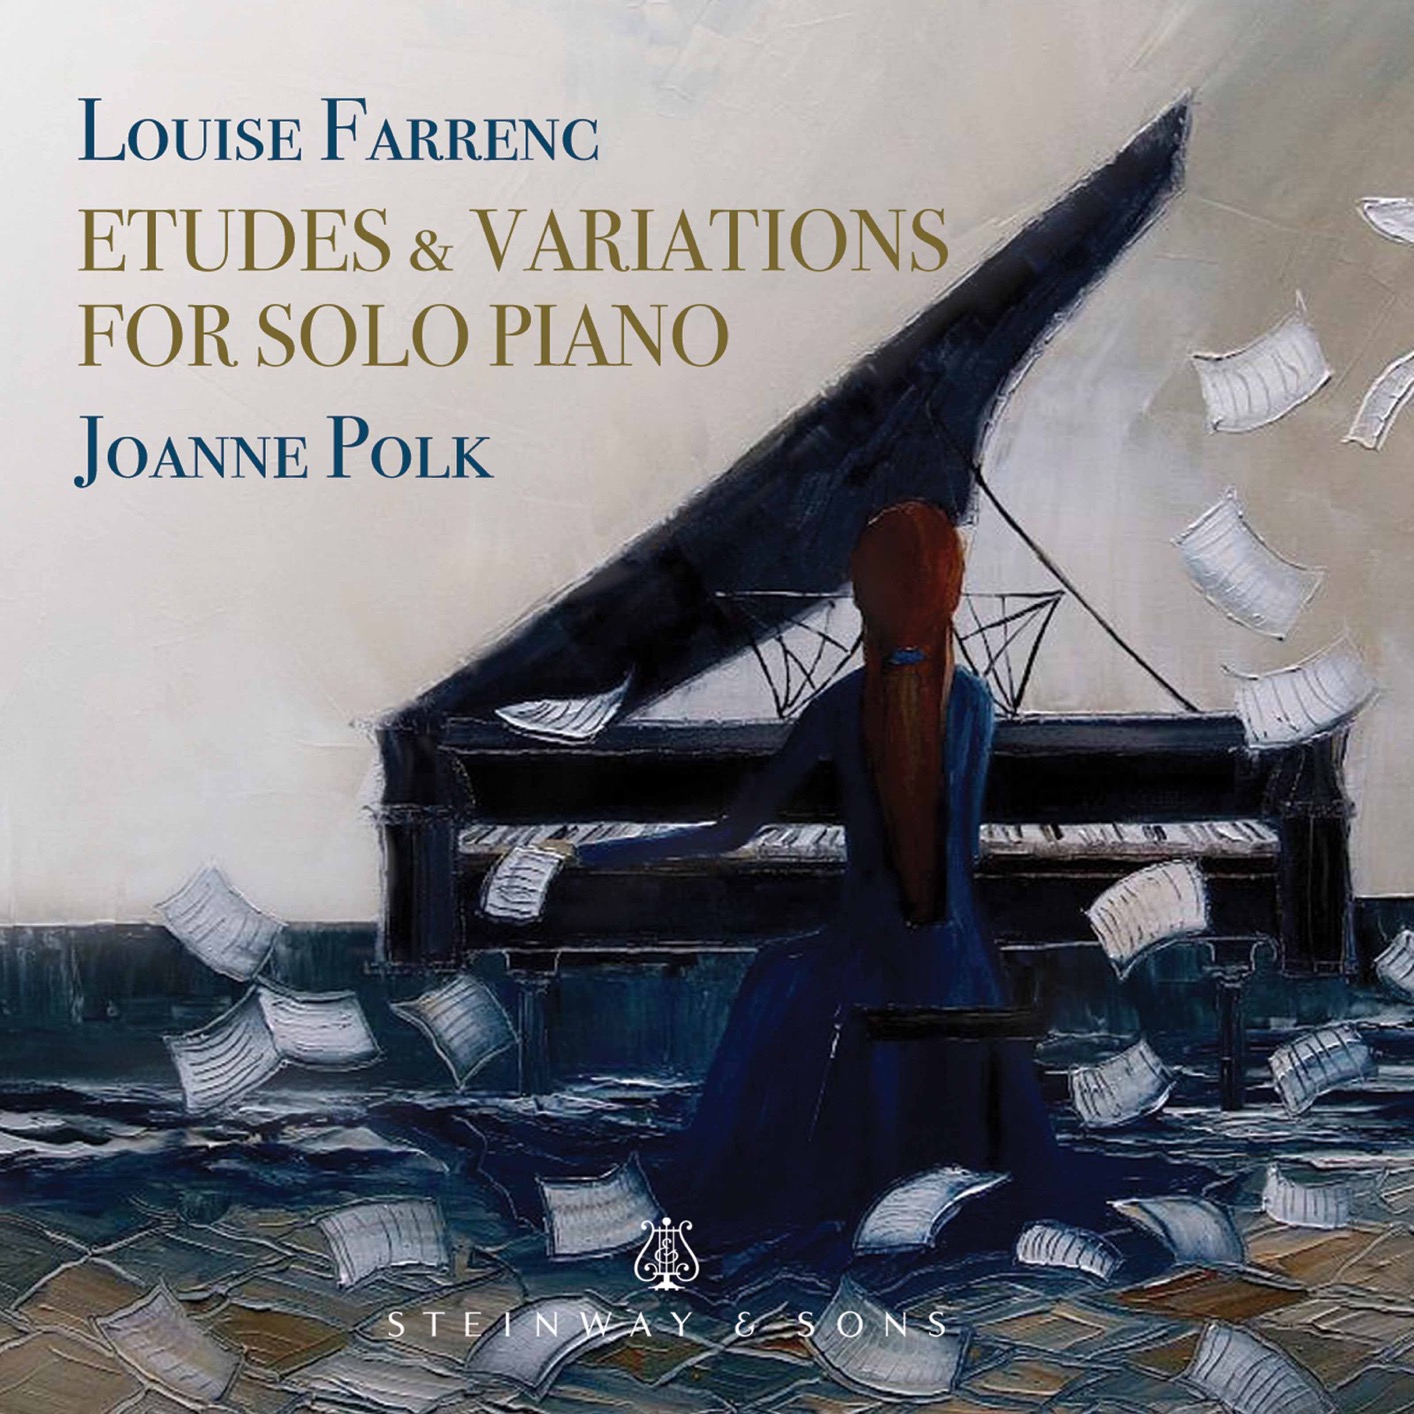 Joanne Polk - Louise Farrenc: Etudes & Variations for Solo Piano (2020) [FLAC 24bit/96kHz]